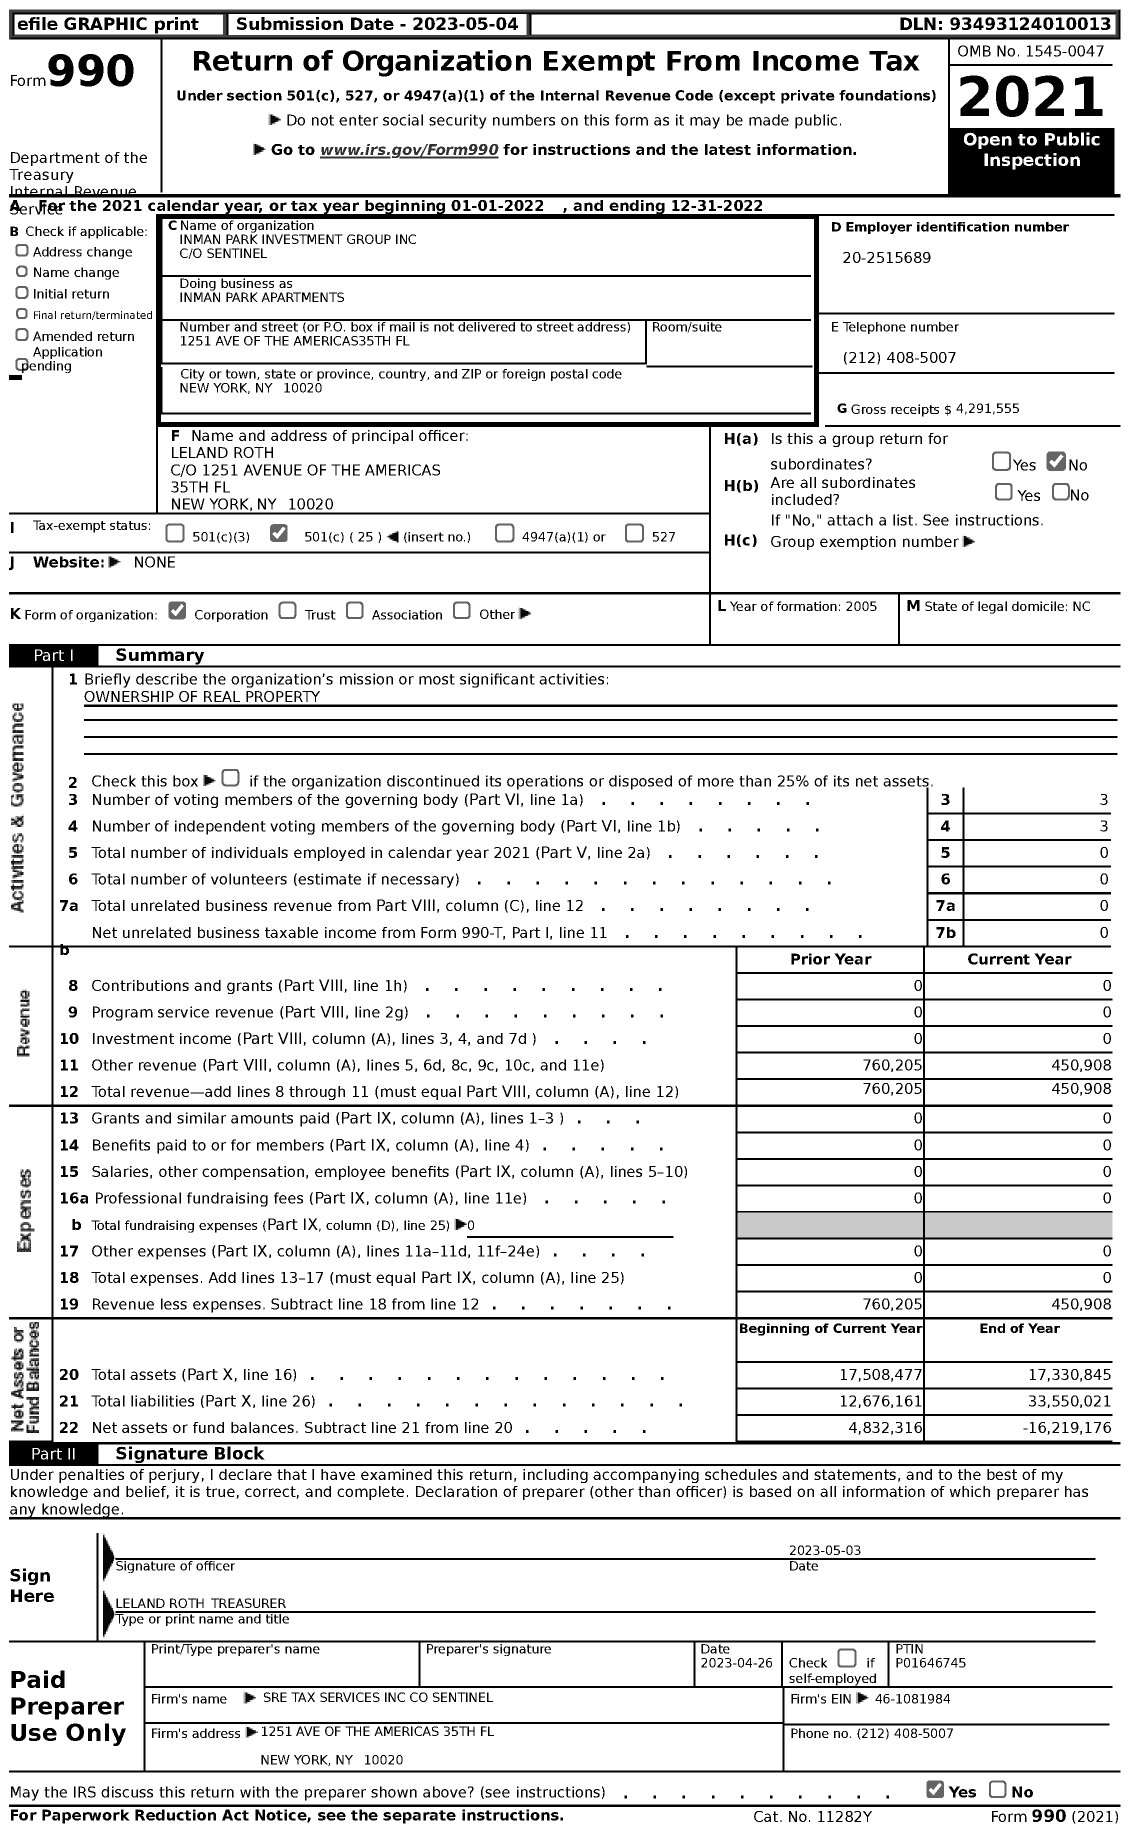 Image of first page of 2022 Form 990 for Inman Park Apartments